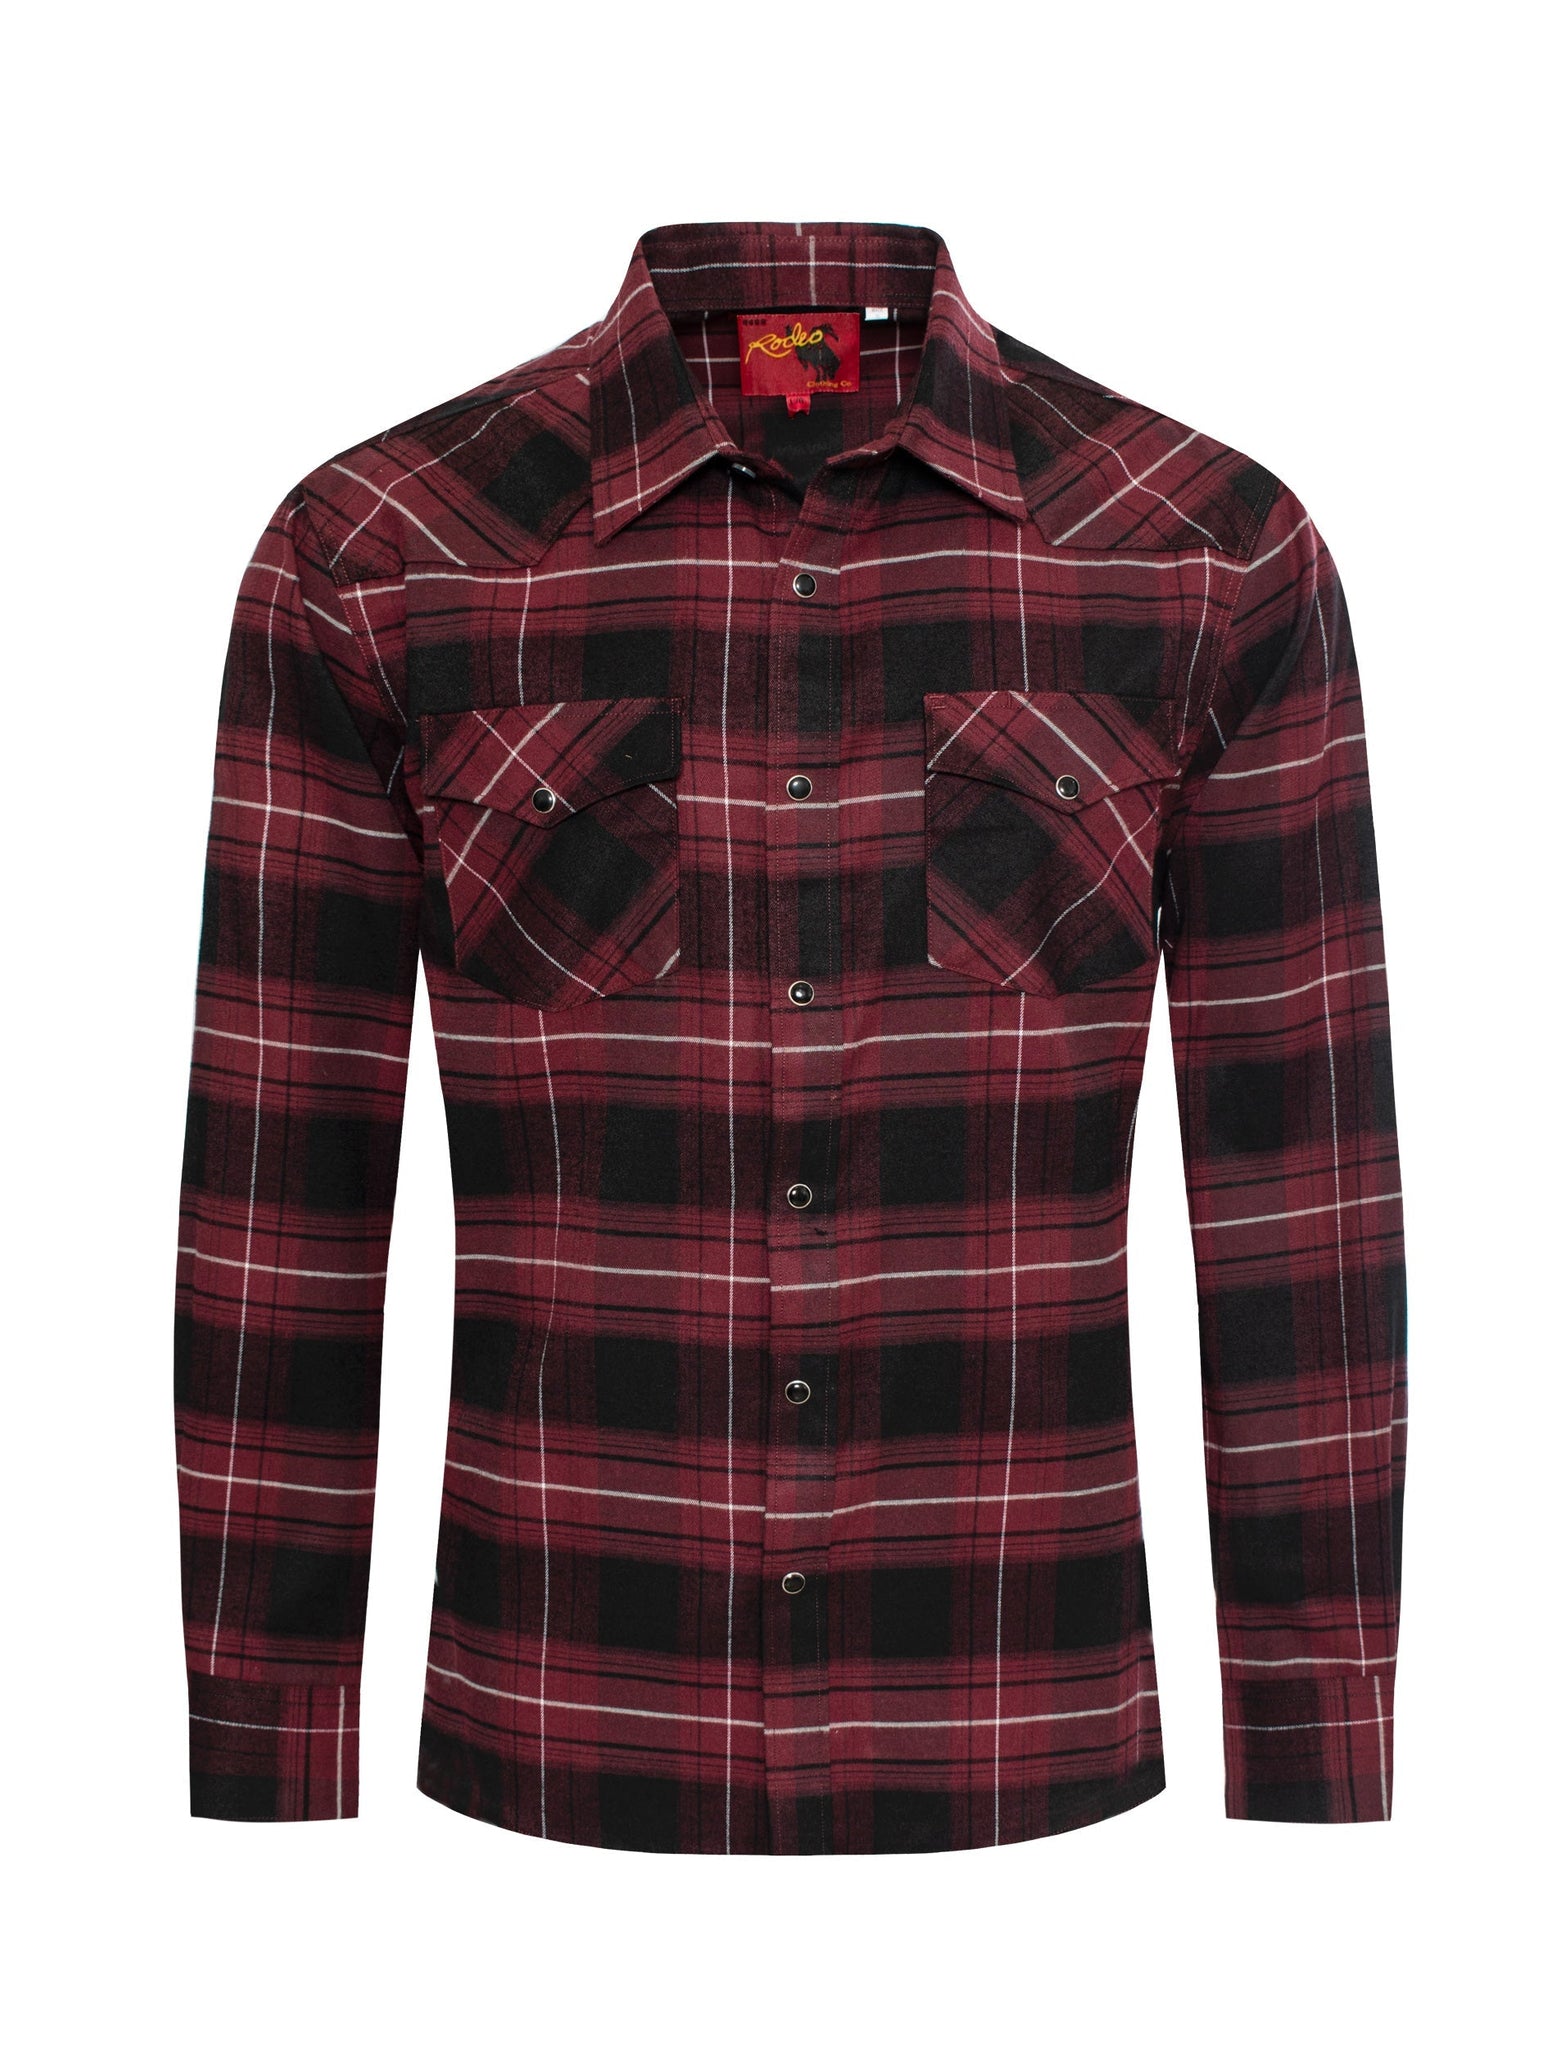 Men's Western Flannel Shirts With Snap Buttons -FLS300-304